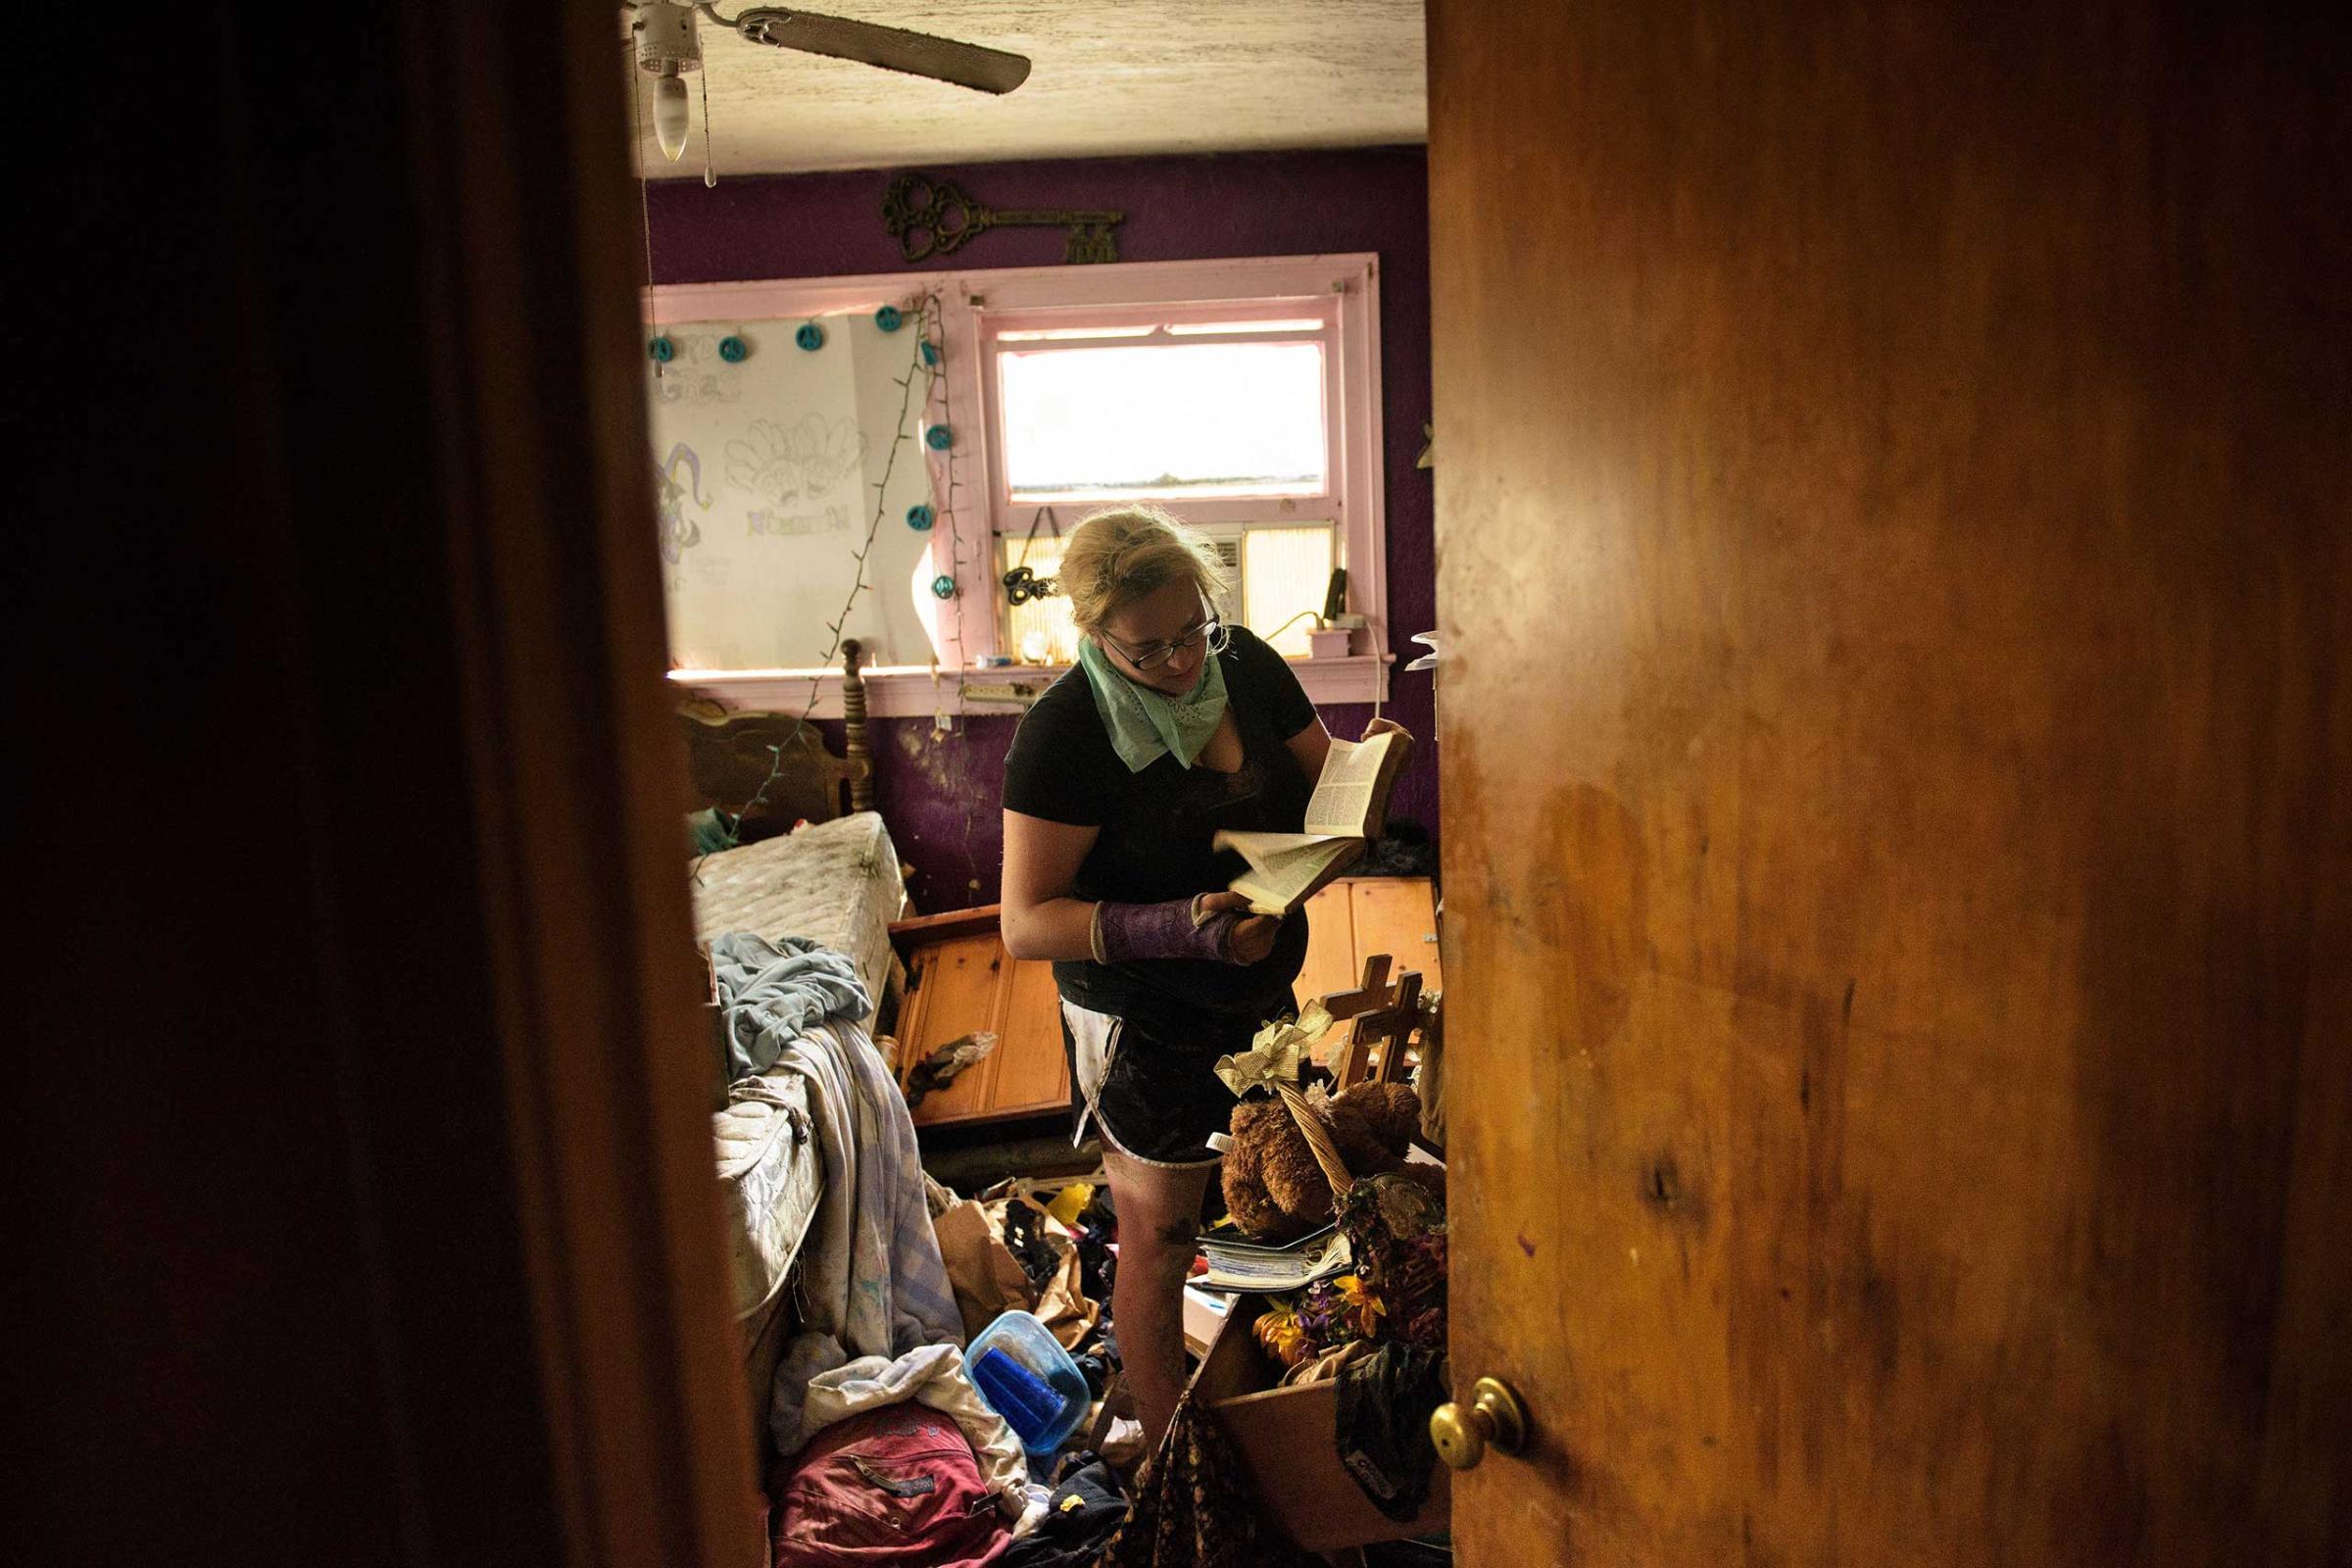 Cheyenne Hughes looks at a bible while salvaging items in her family's home after flooding in Denham, La., on Aug. 17, 2016.